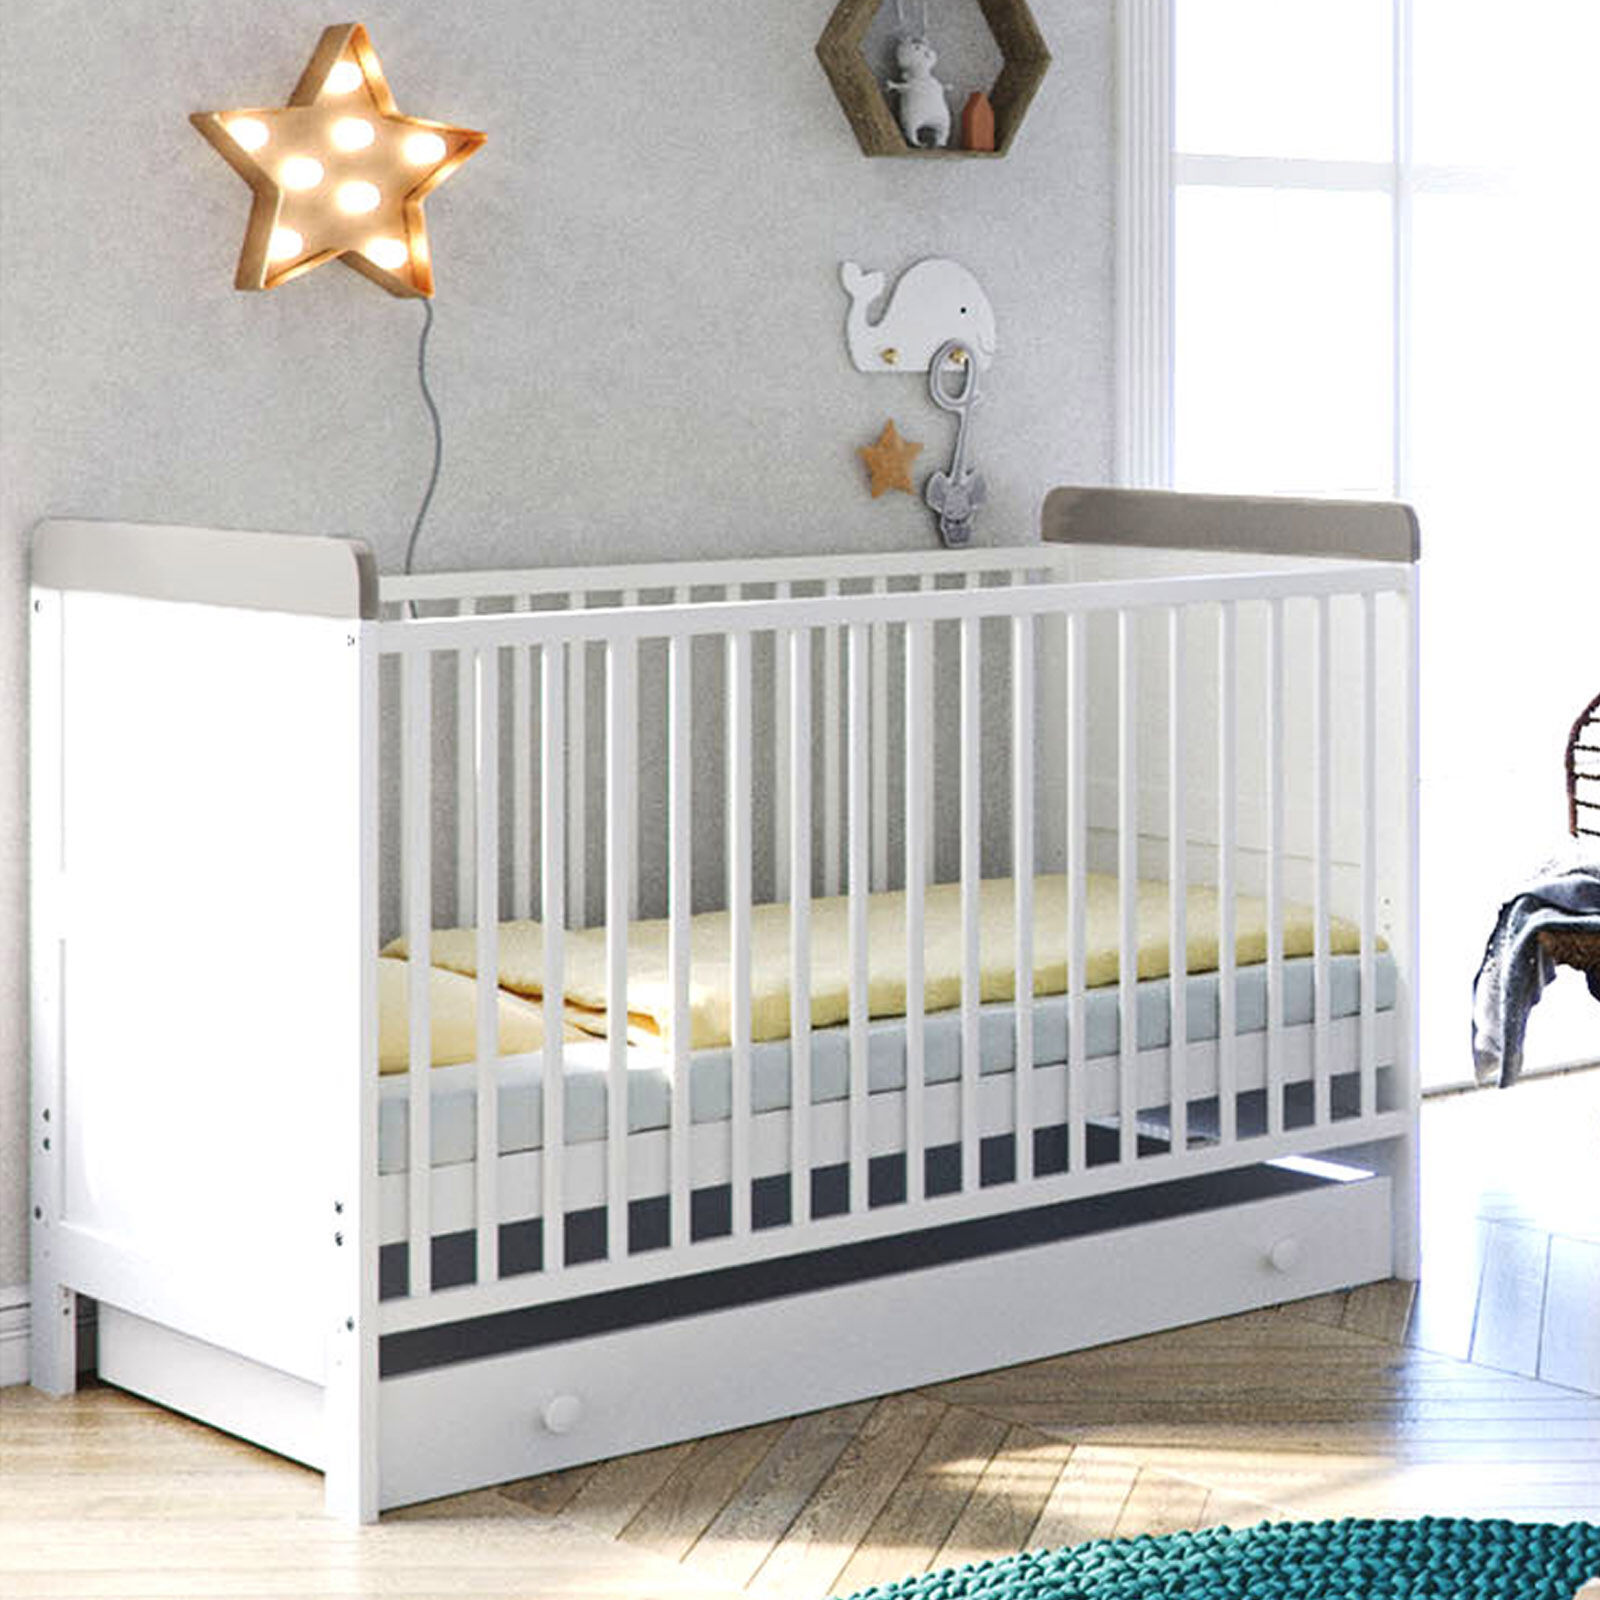 Little Acorns Classic Milano Cot Bed with Deluxe Foam Mattress - White / Grey